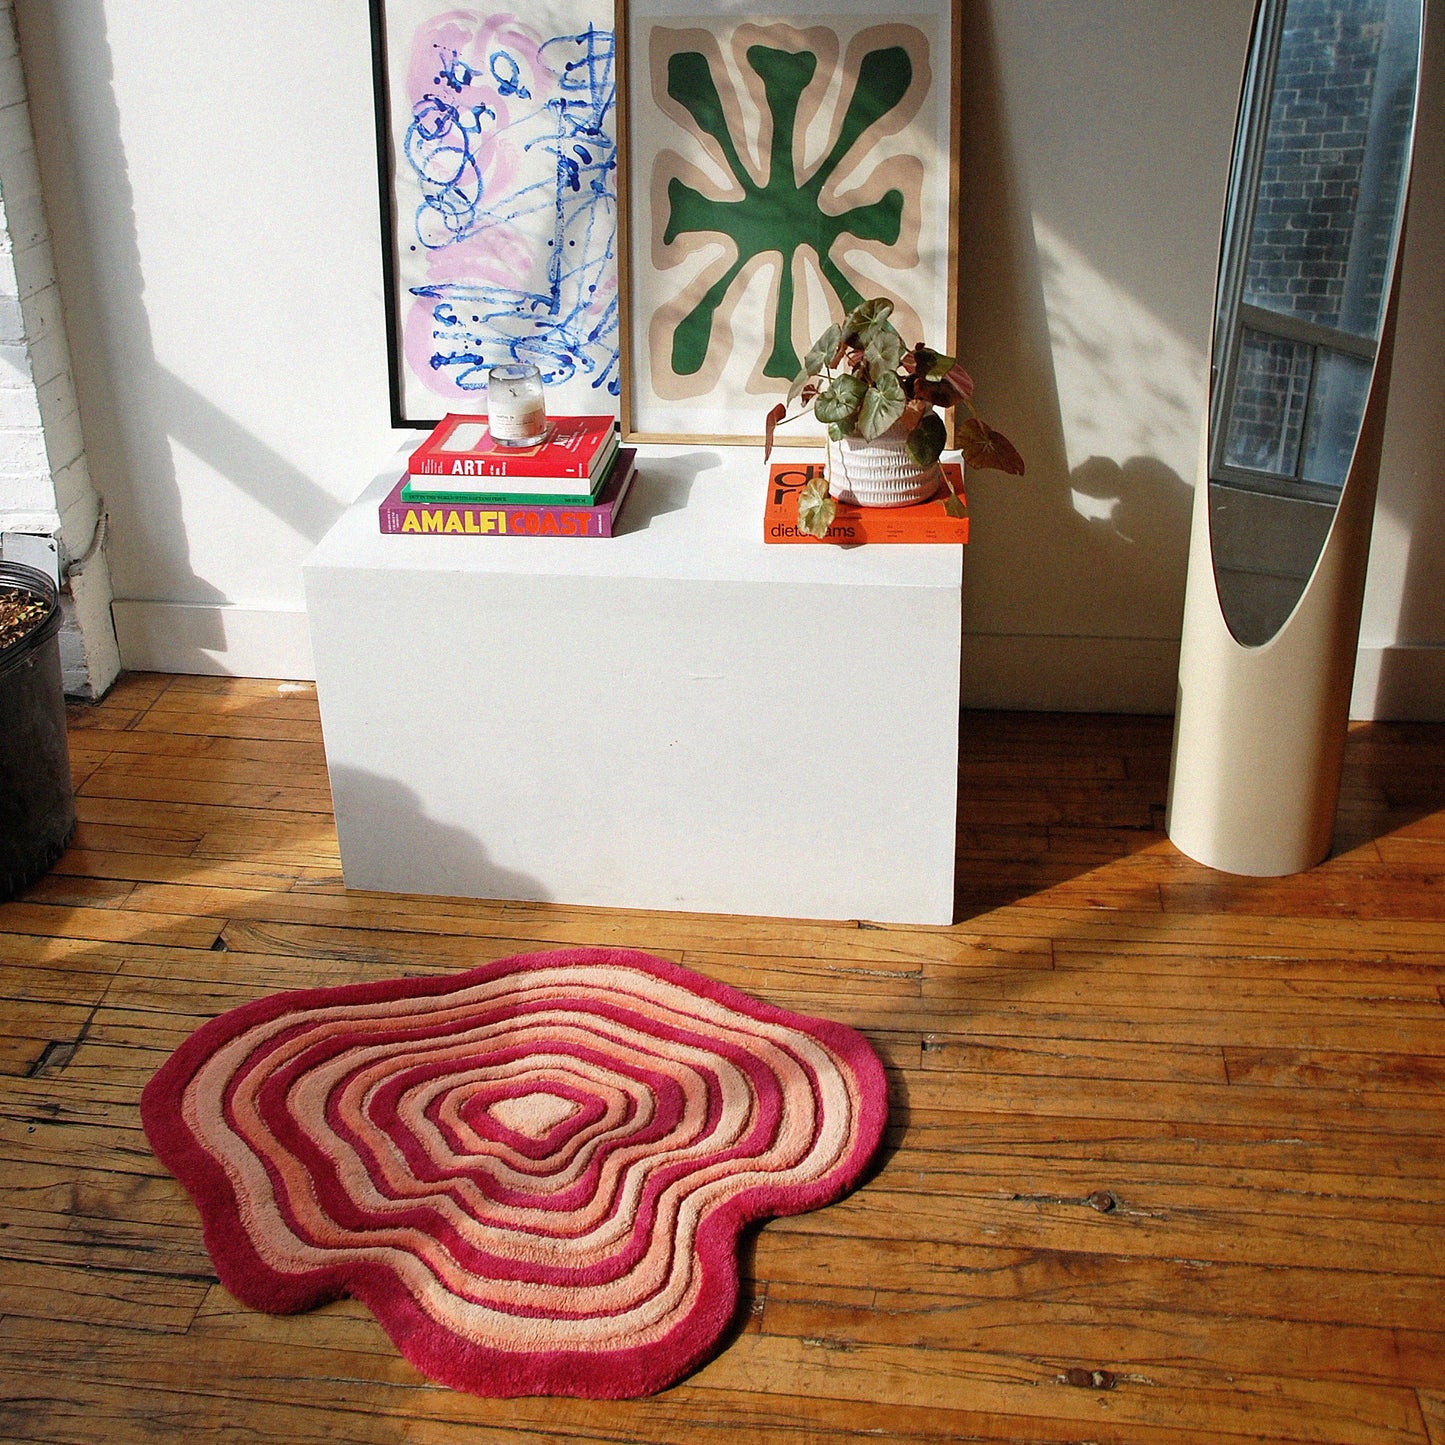 Our portal rug styled in a stylish modern setup. It is in front of a vintage white lipstick mirror, and a white table styled  with 4 books, a plant, candle, and 2 framed abstract art pieces on top